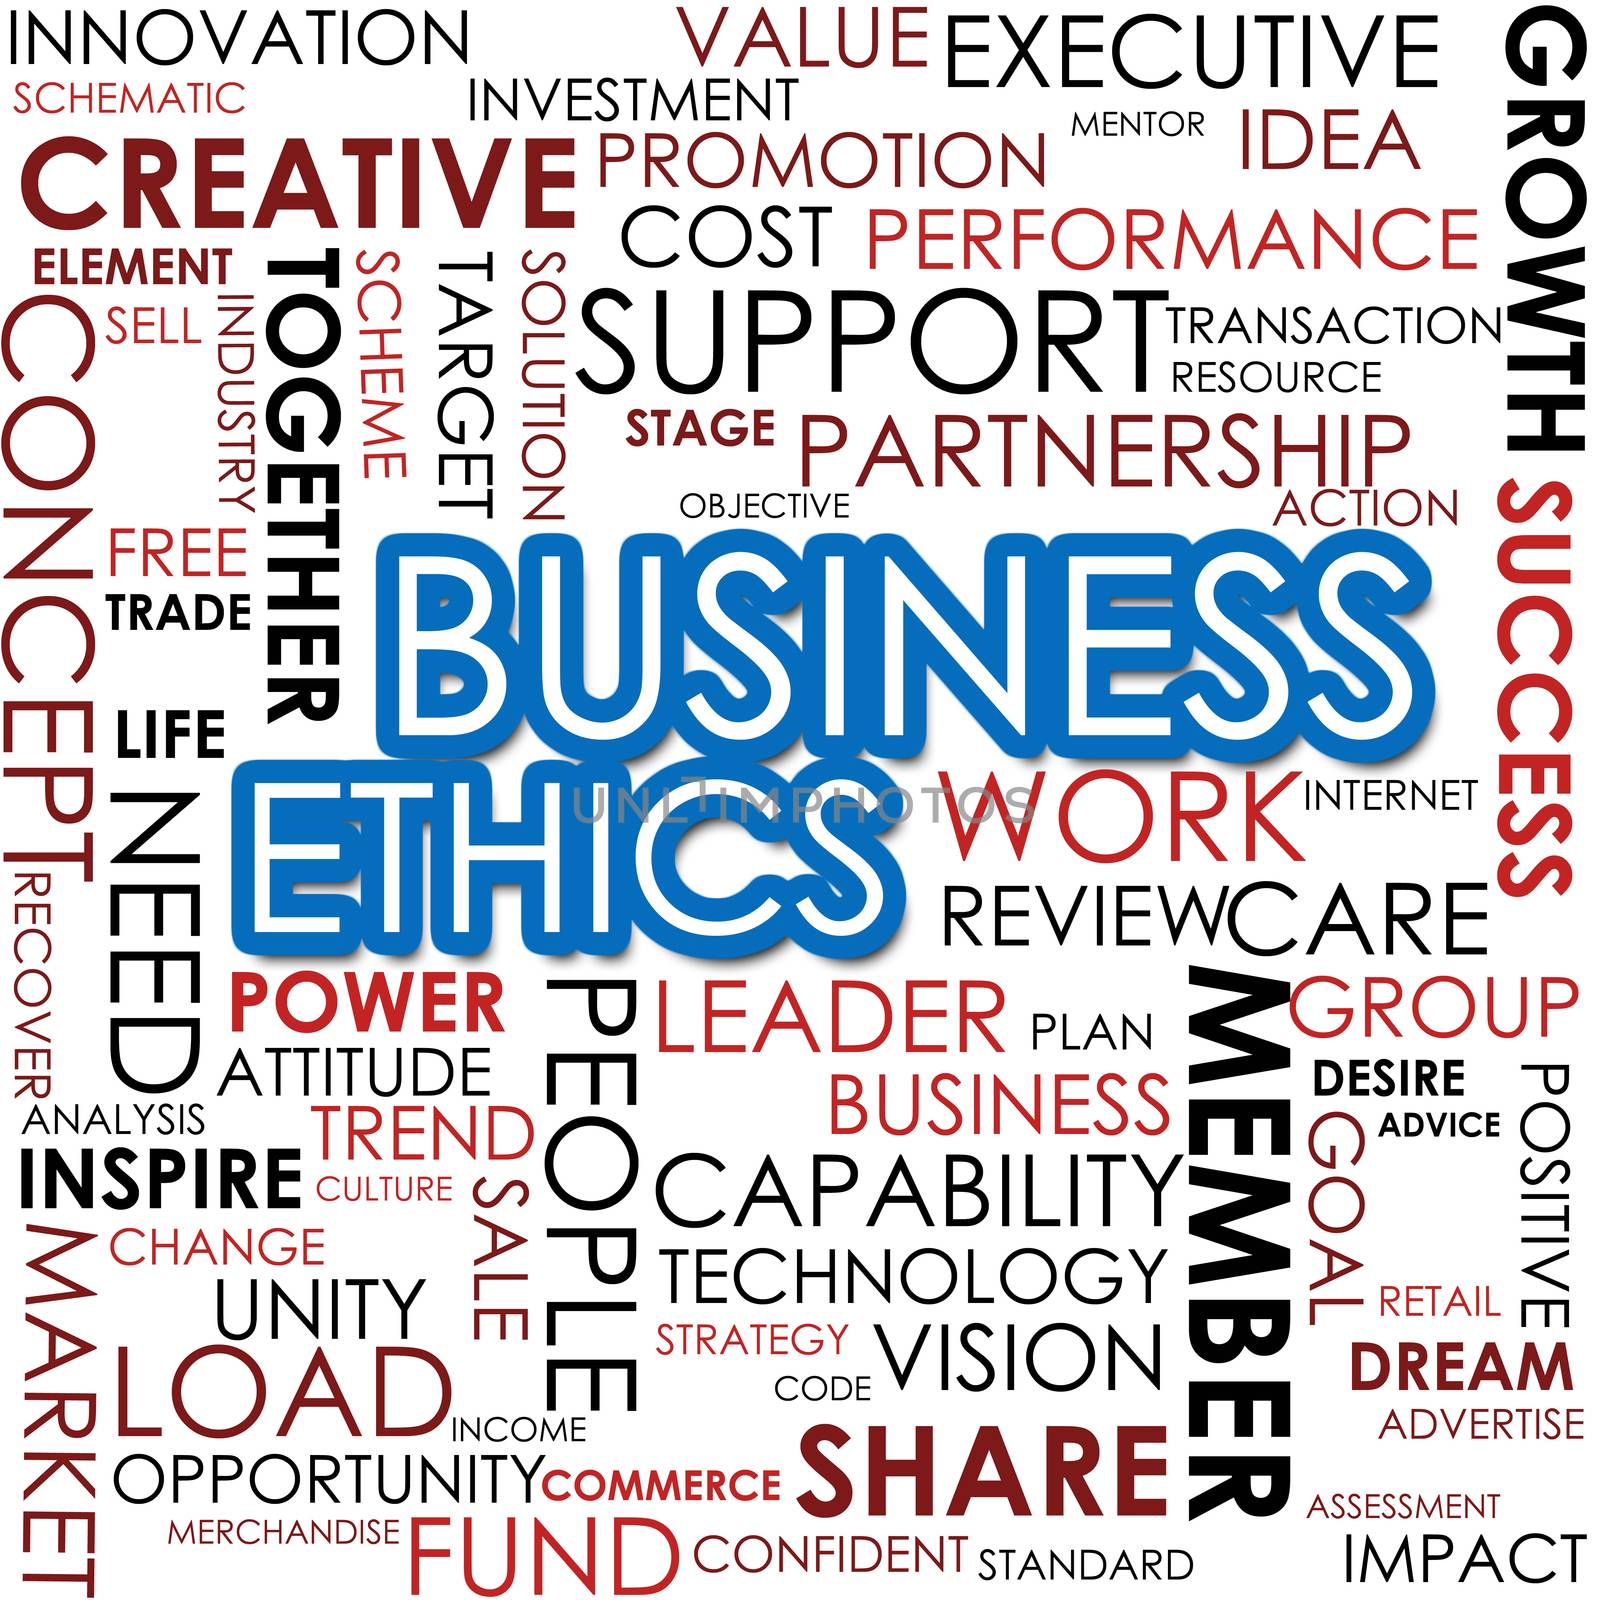 Business ethics word cloud cloud image with hi-res rendered artwork that could be used for any graphic design.